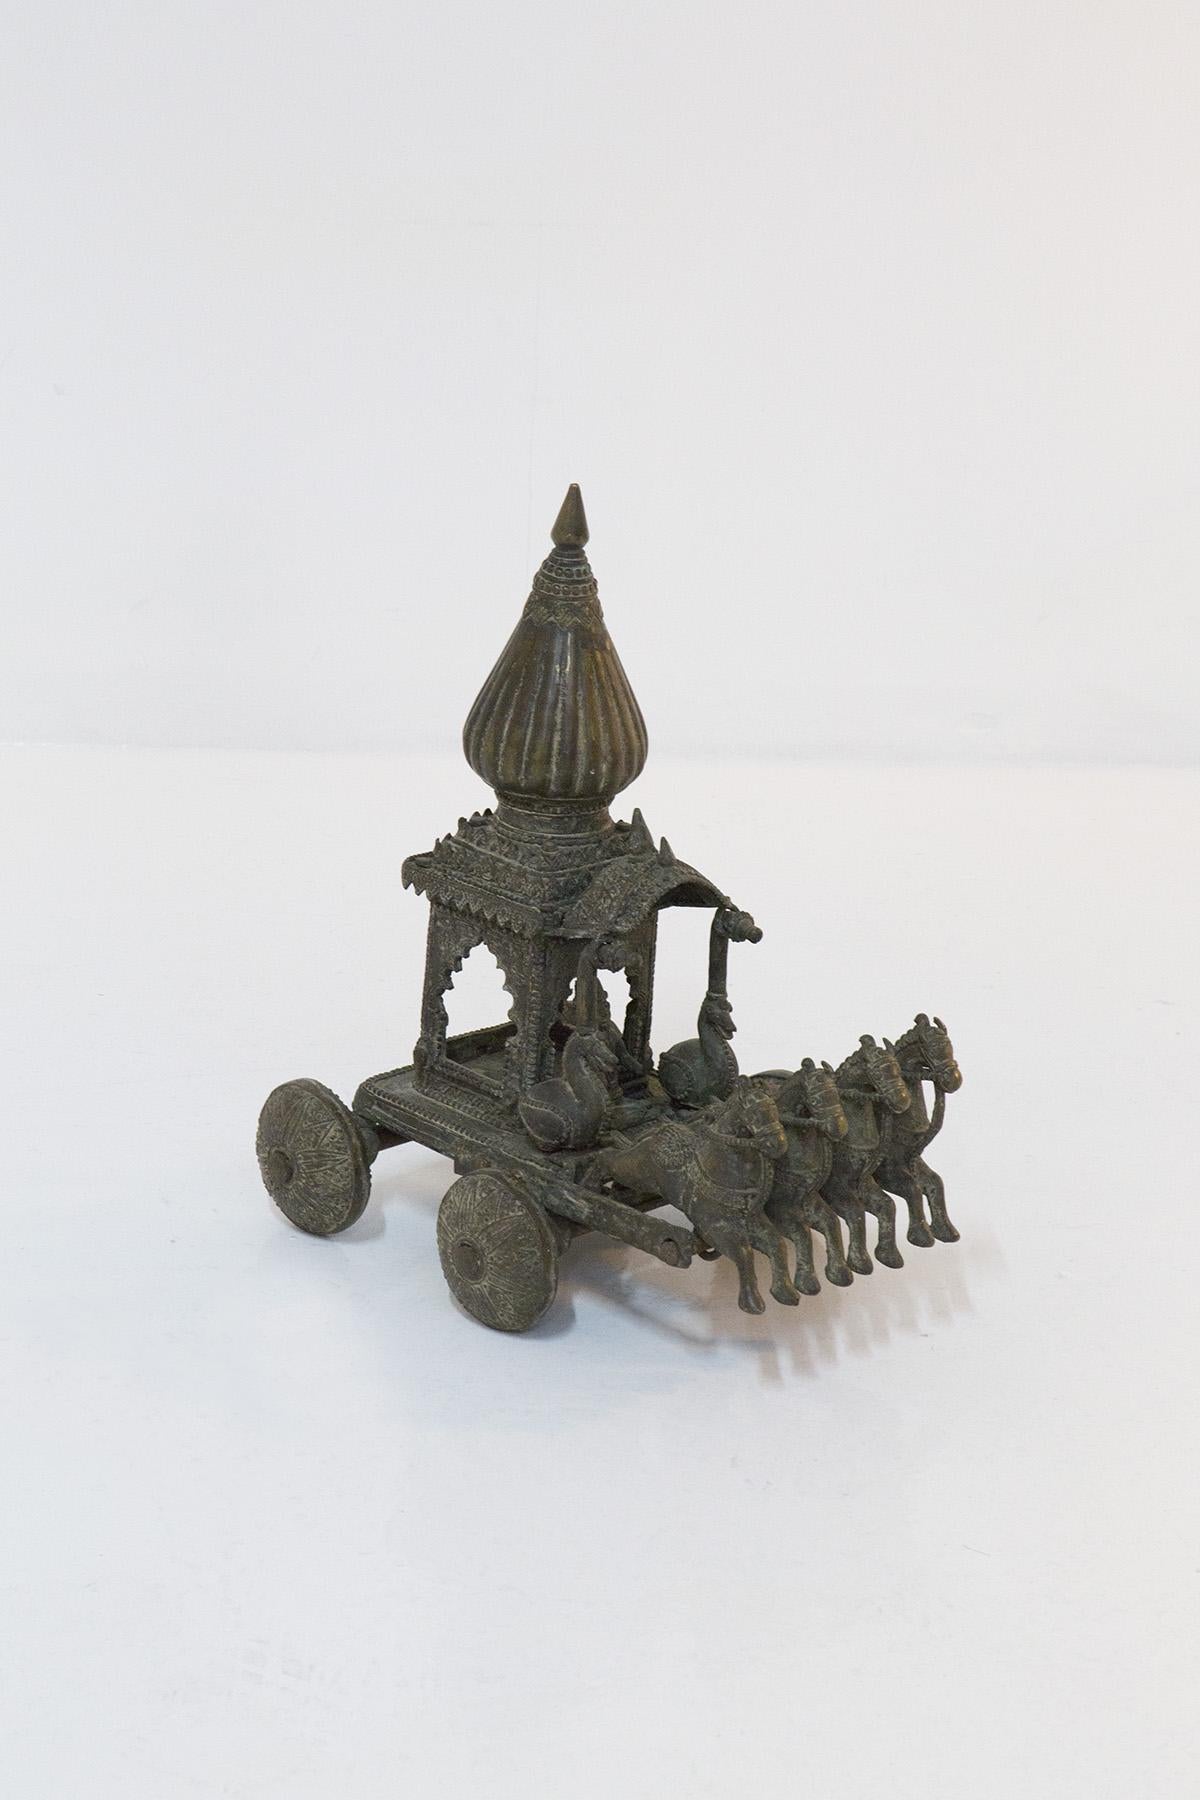 Welded cast iron toy from the Indian 900s depicting a chariot with a square canopy and conical dome. We can identify this toy-statue as a depiction of Krishna’s Rath Gita (Bhagavad Gita).
Arjuna and Hanuman actually met on a first occasion, in